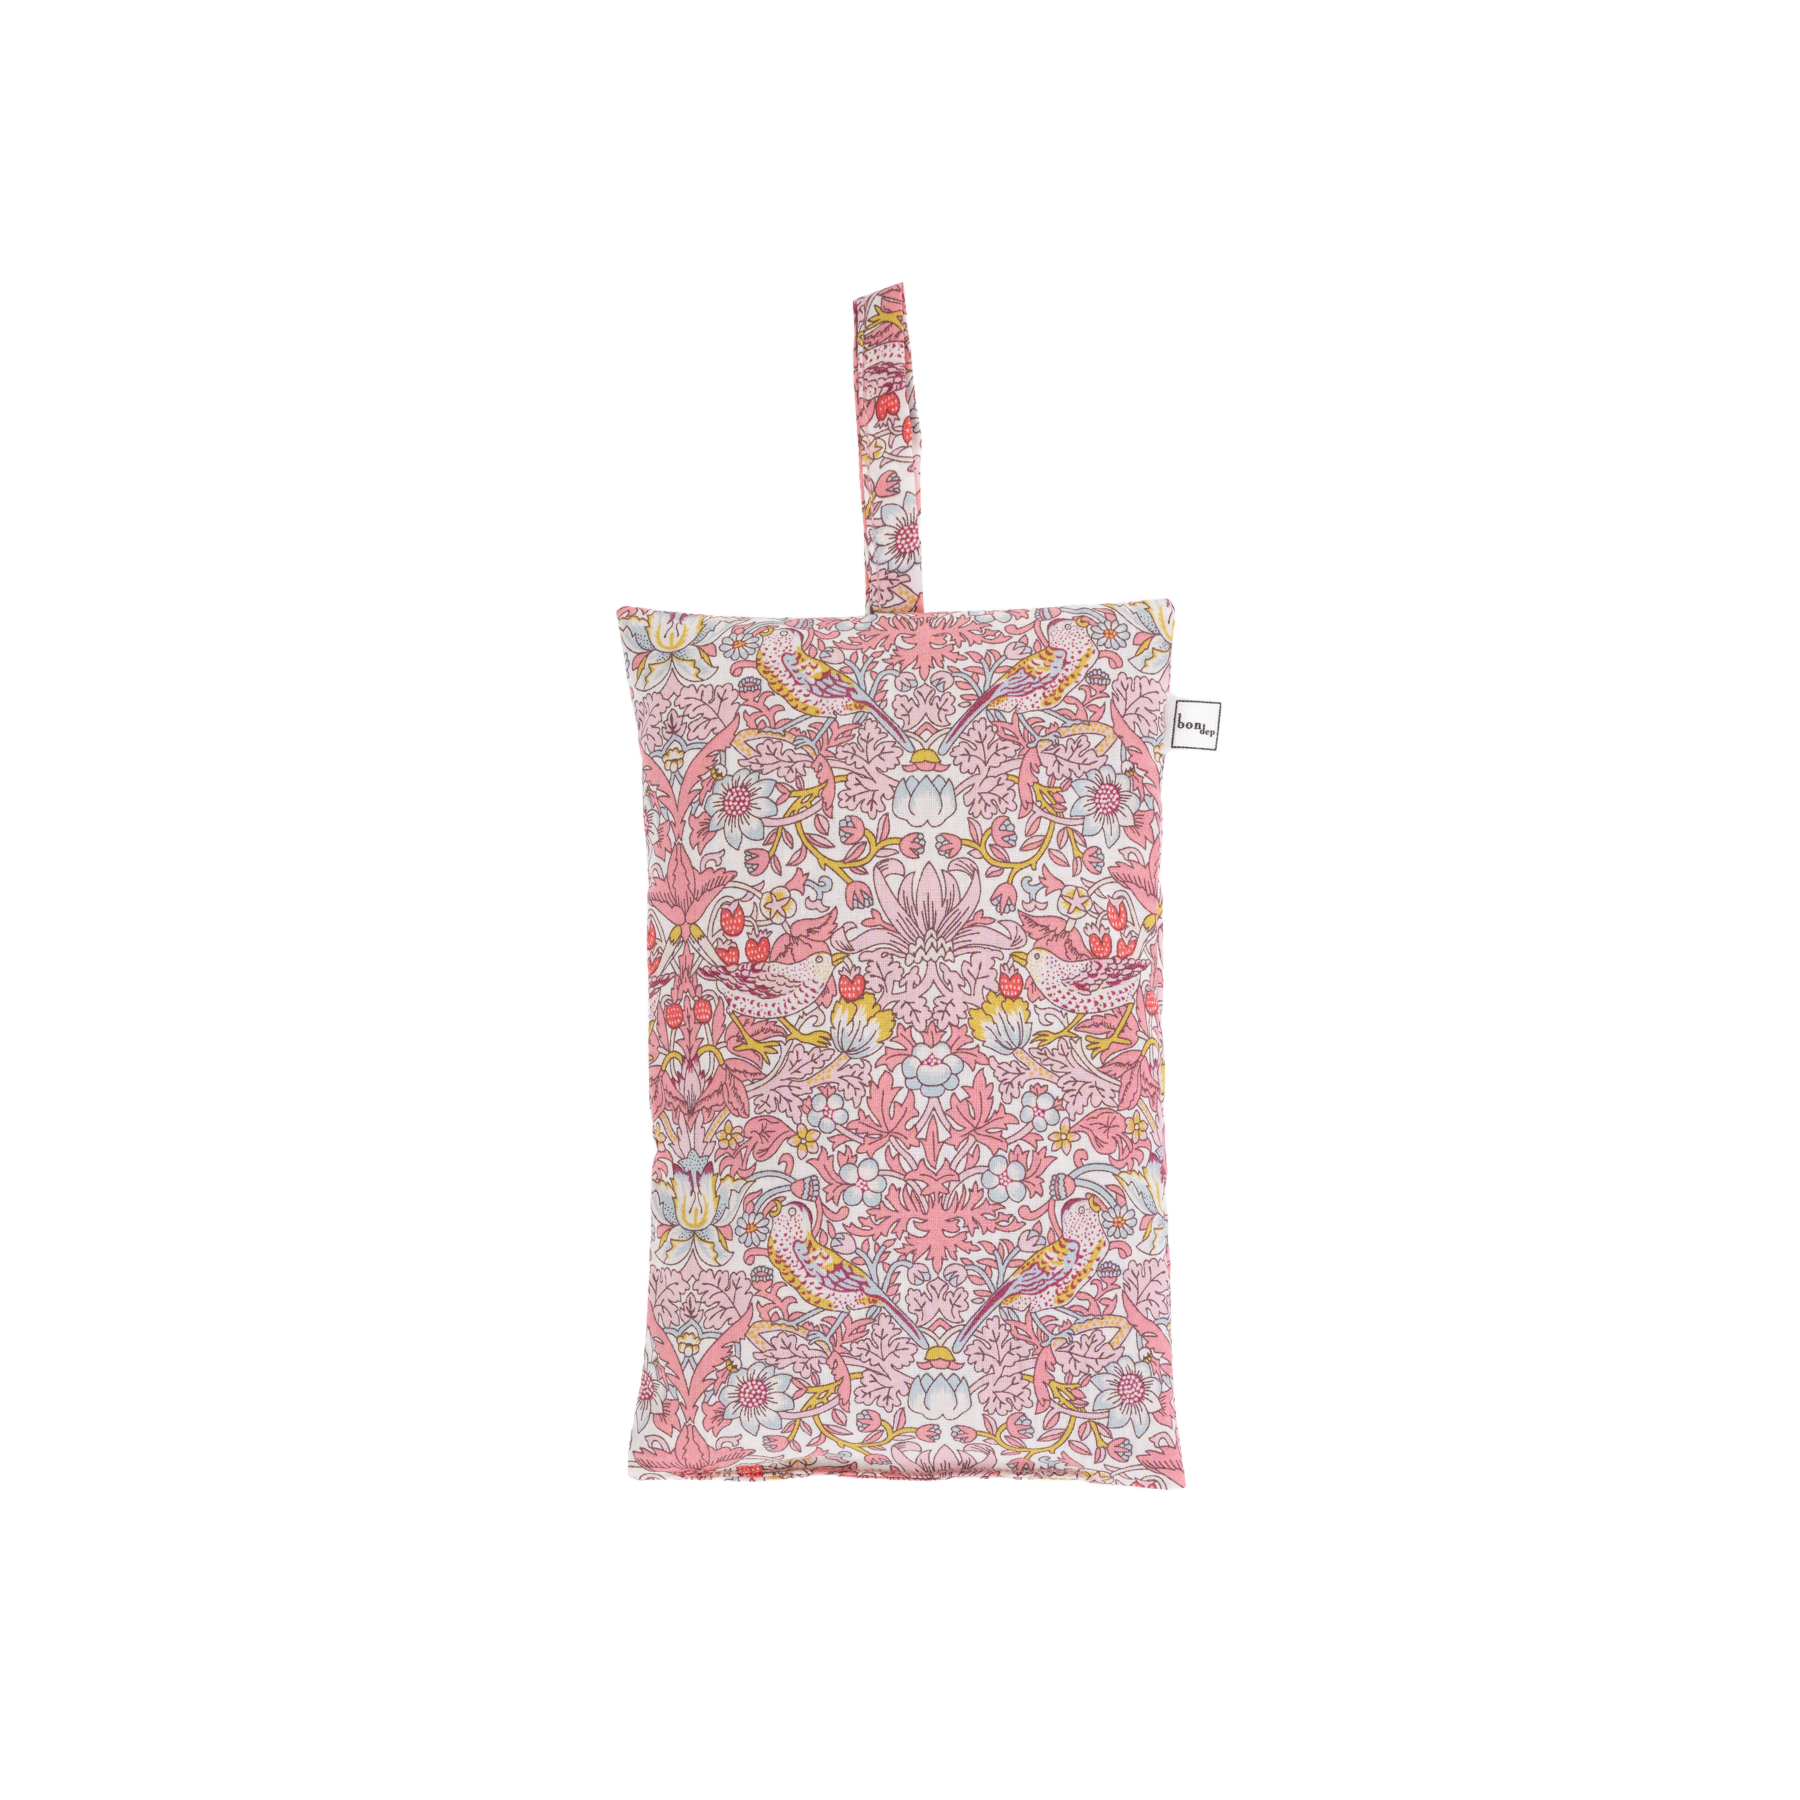 Image of Lavender bags mw Liberty Strawberry pink from Bon Dep Essentials